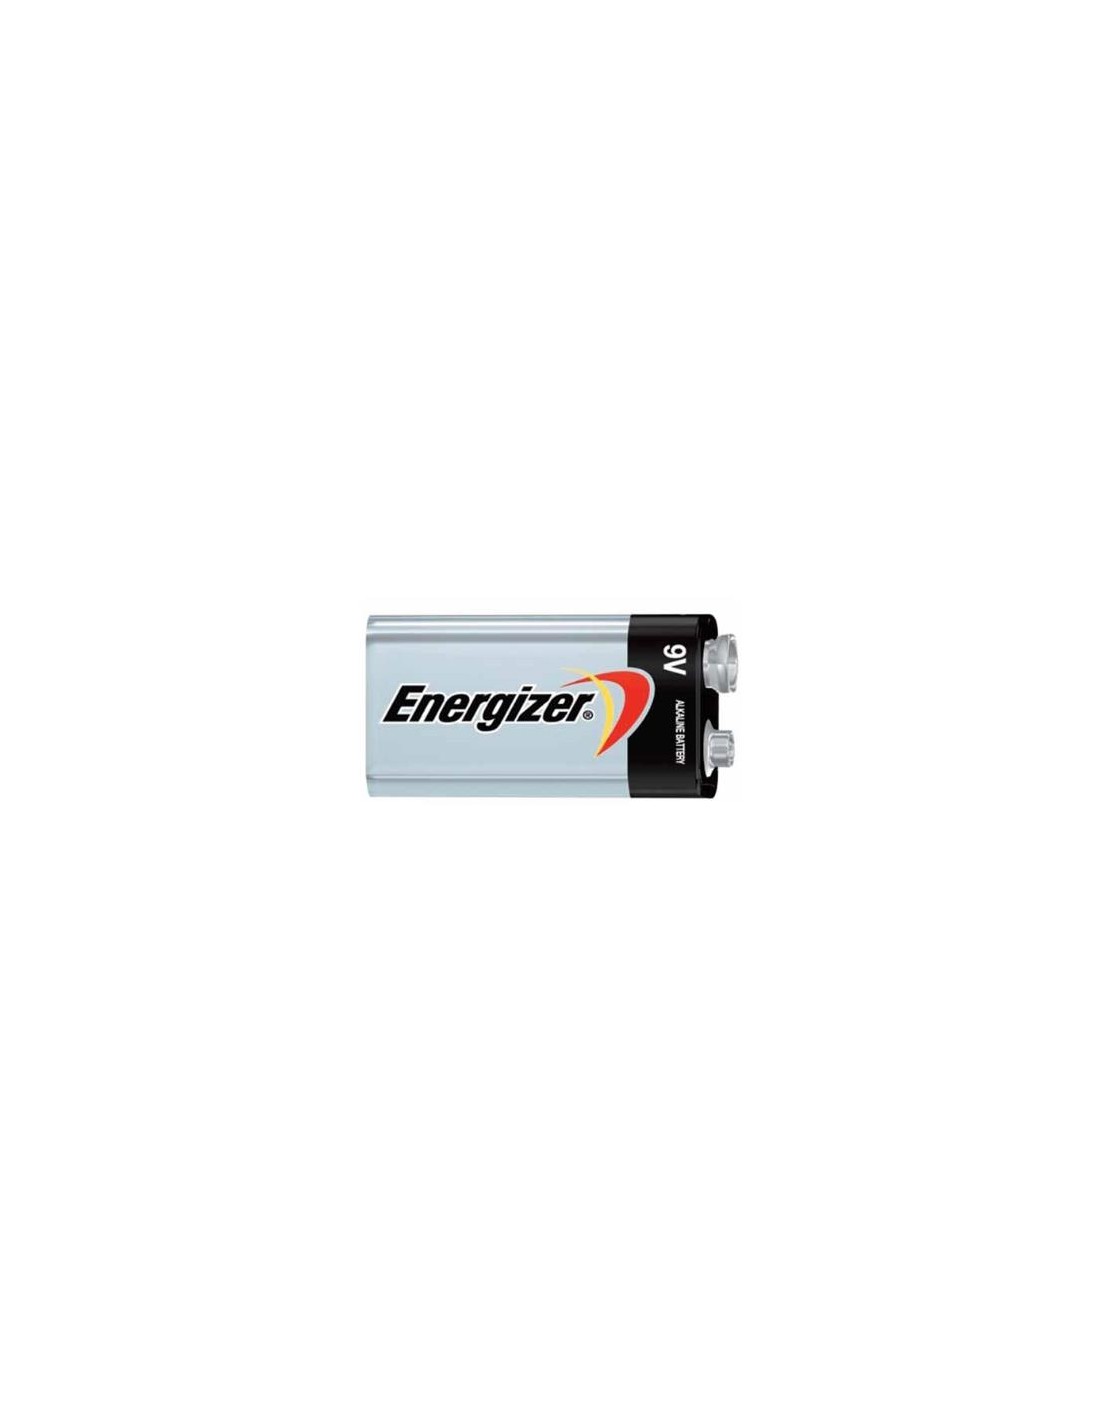 ENERGIZER®TOUCH TECH HANDHELD - French French